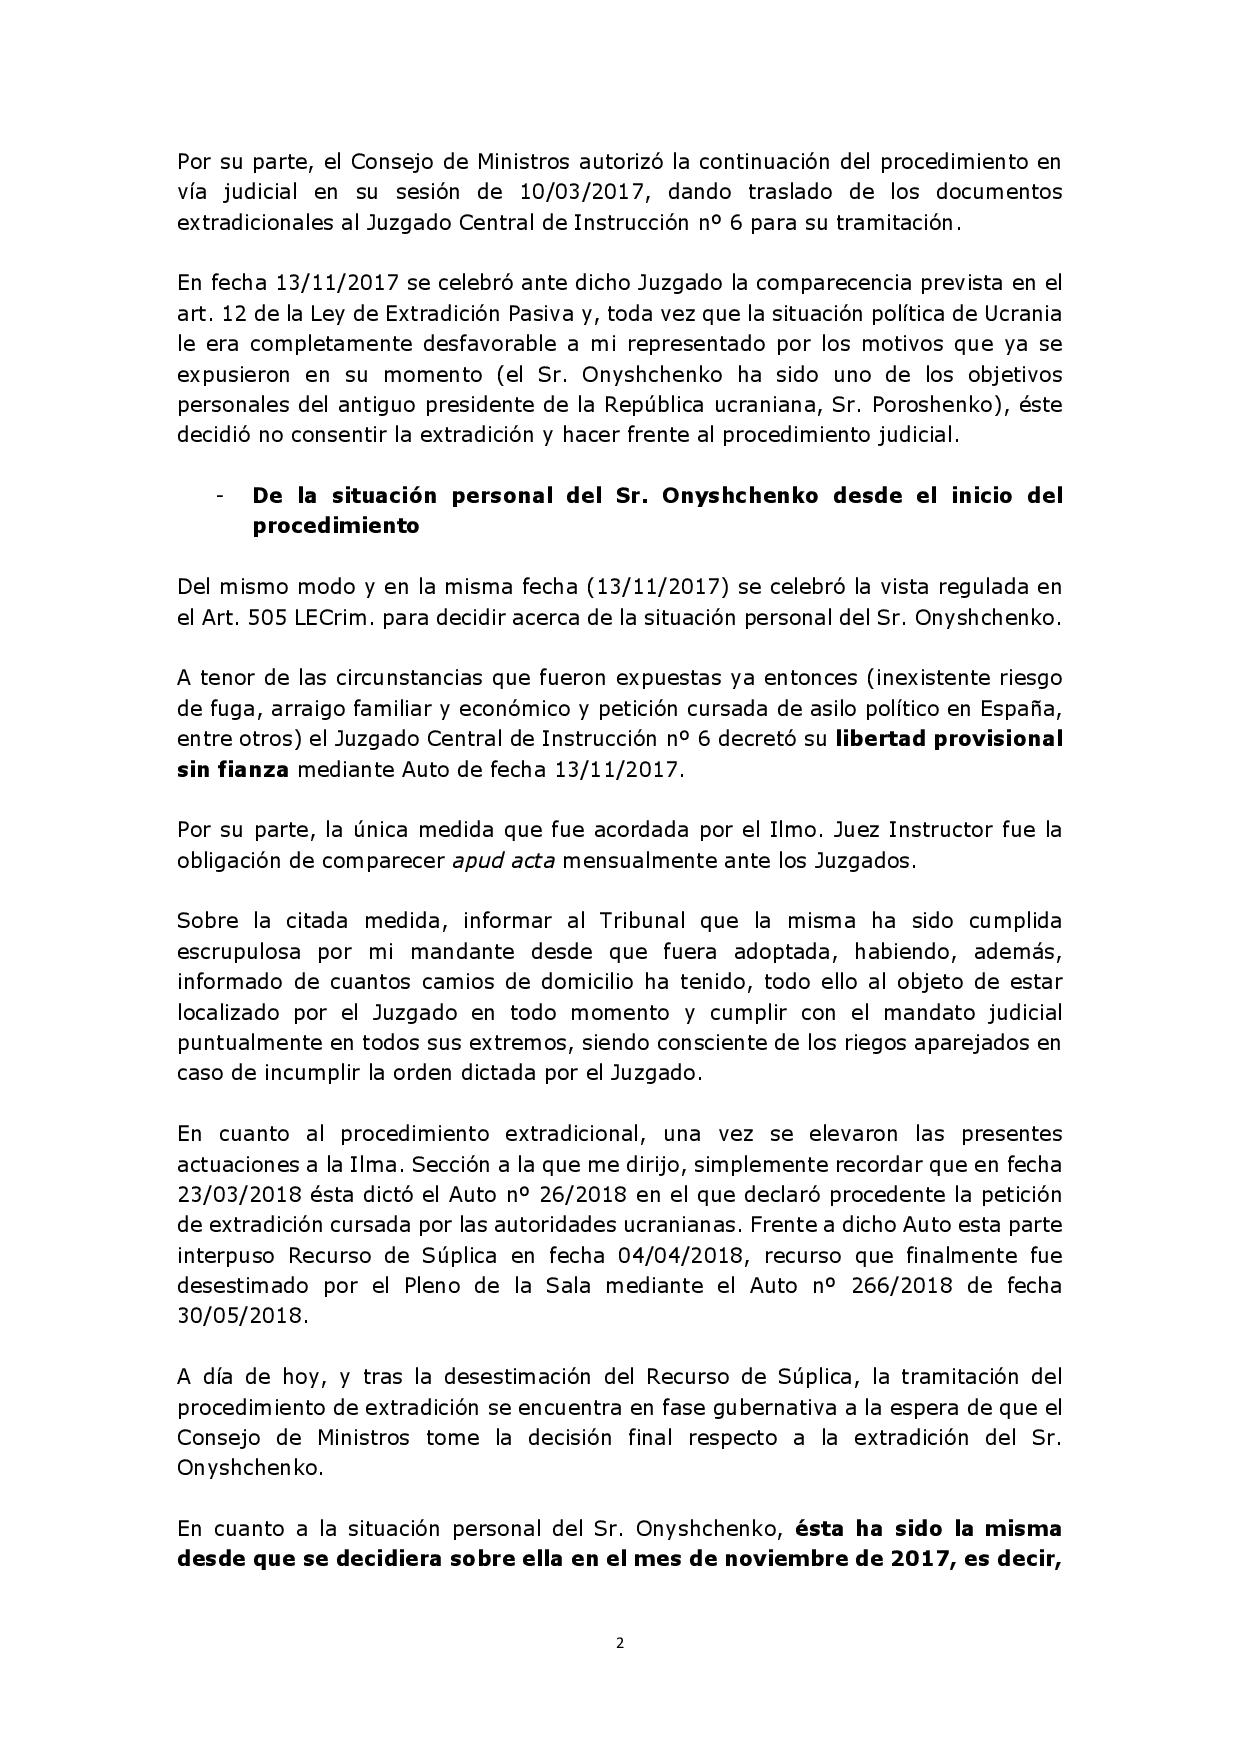 Part of a letter that ex-lawmaker Oleksandr Onyshchenko&#8217;s lawyer sent to a Spanish court asking to allow her client to voluntarily surrender to the Ukrainian authorities, and not to arrest him for extradition.